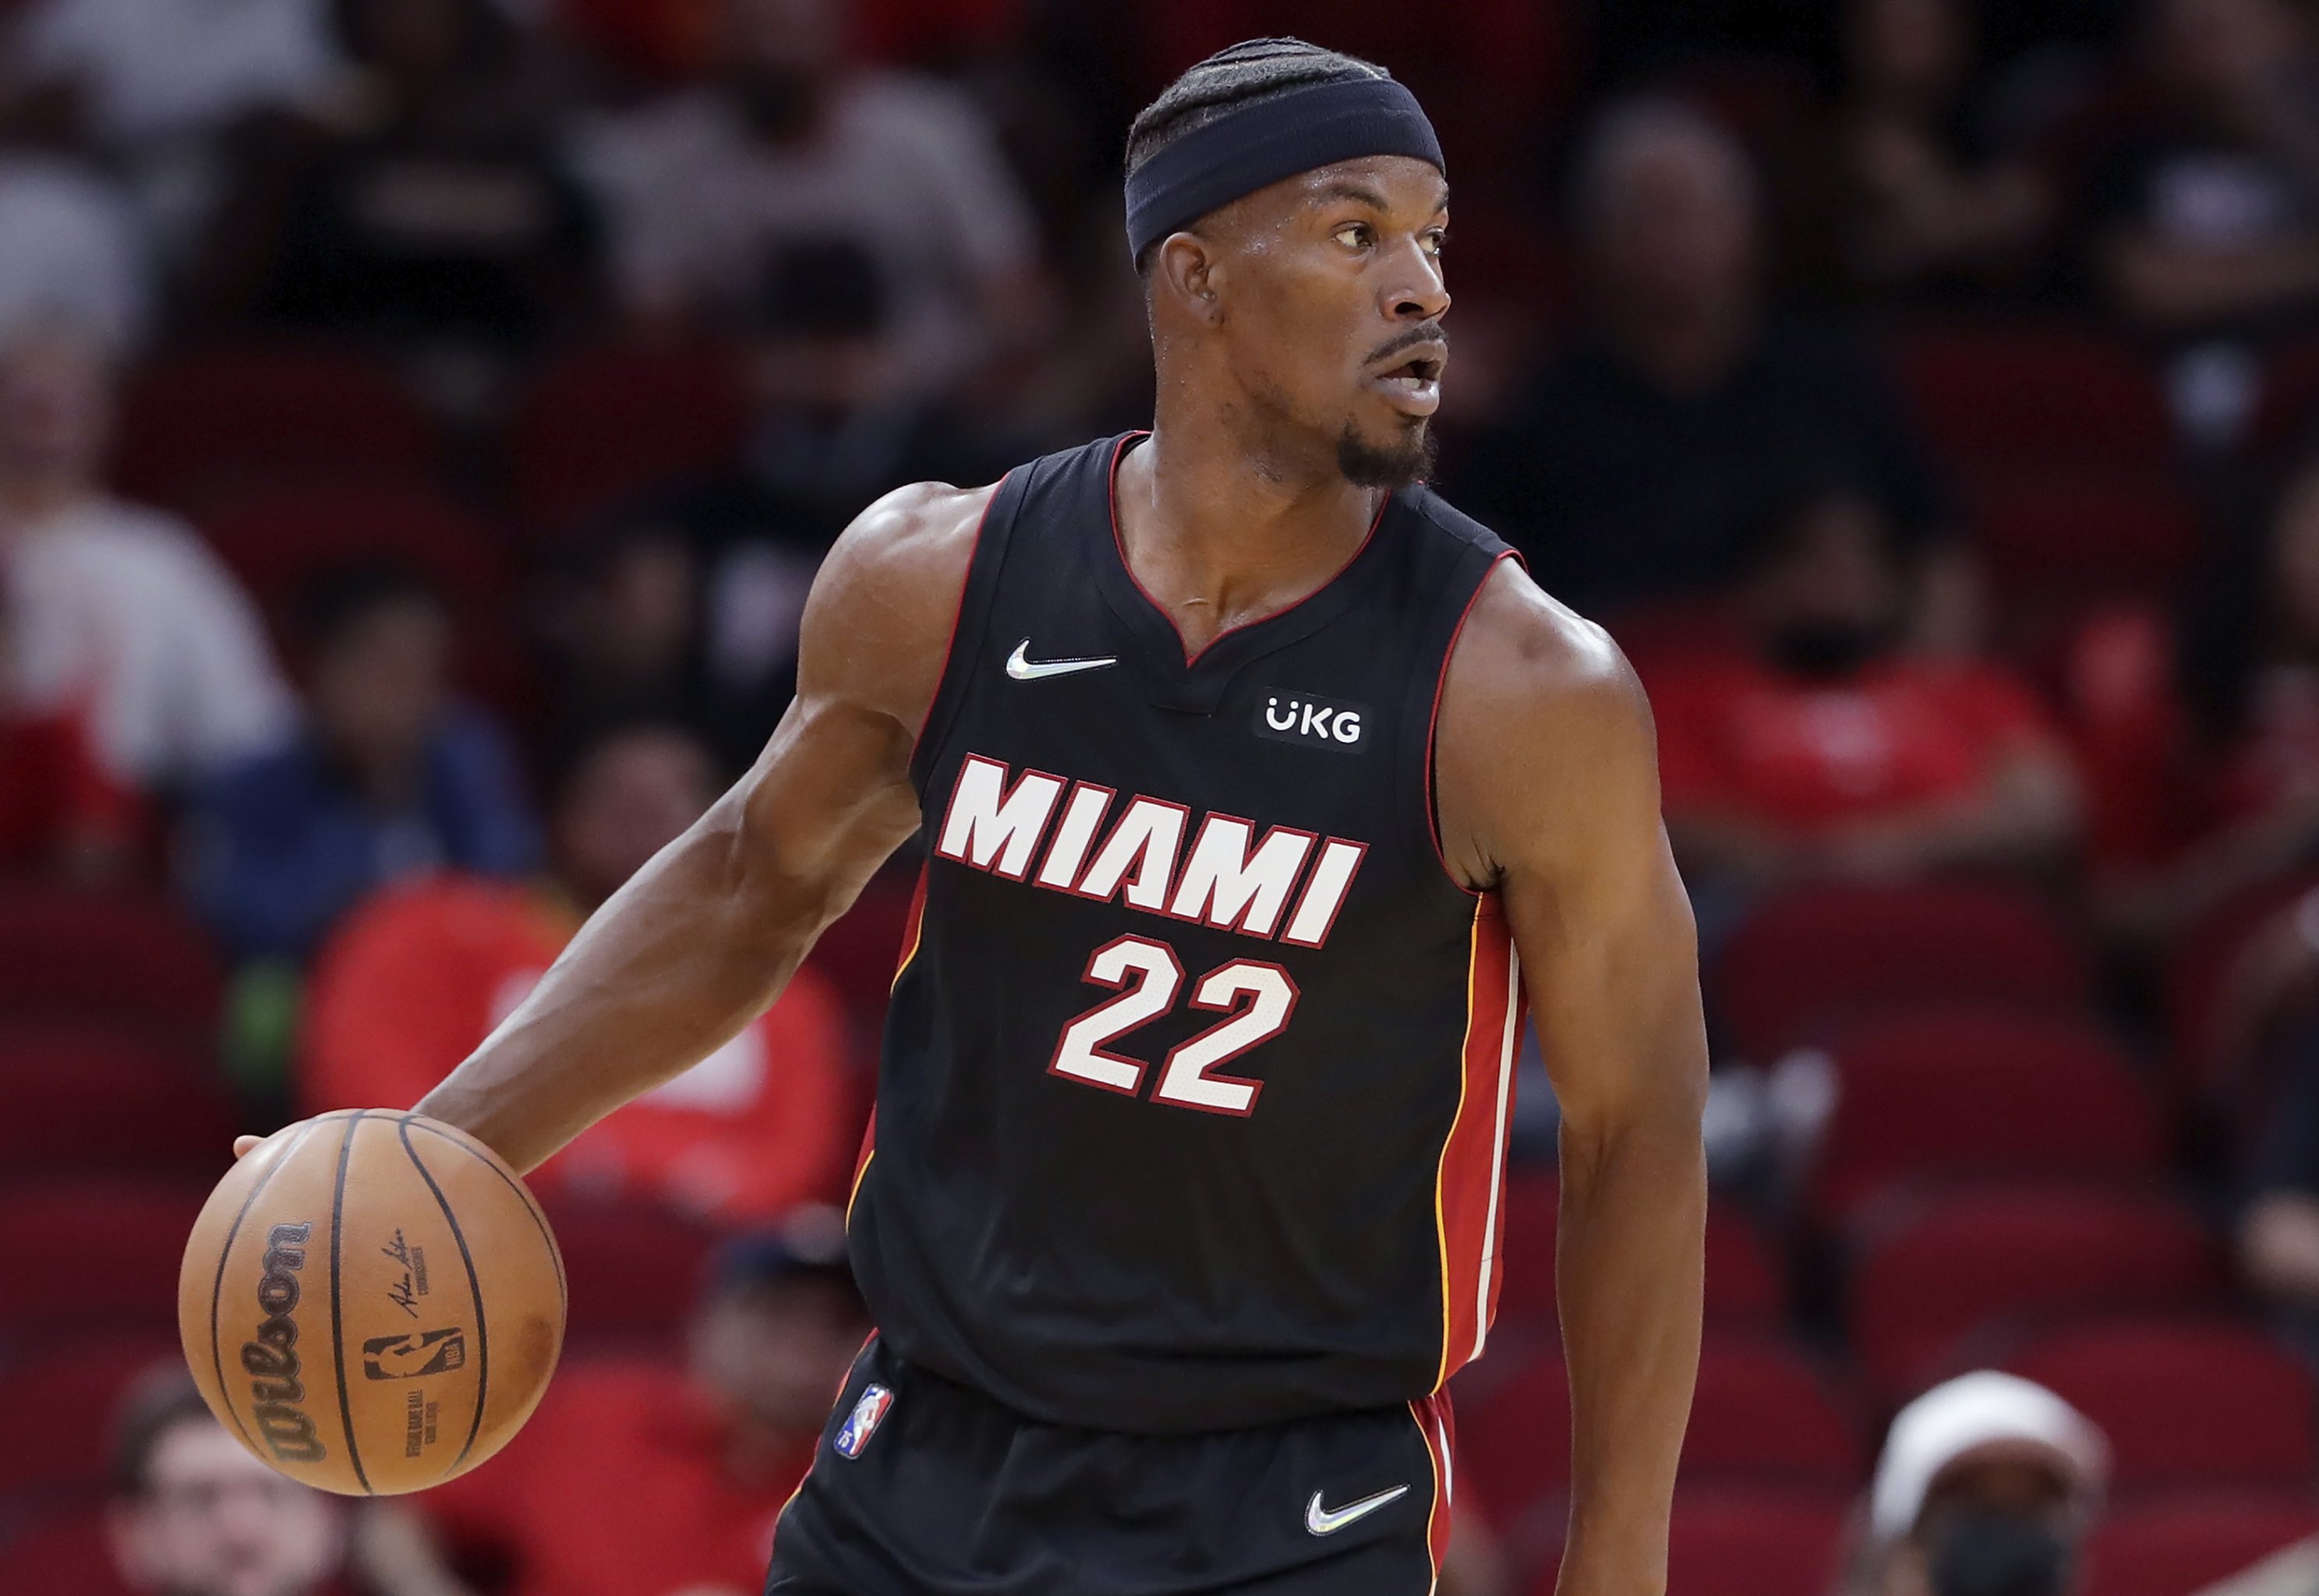 2021-22 NBA fantasy basketball: Top 250 player rankings with notes